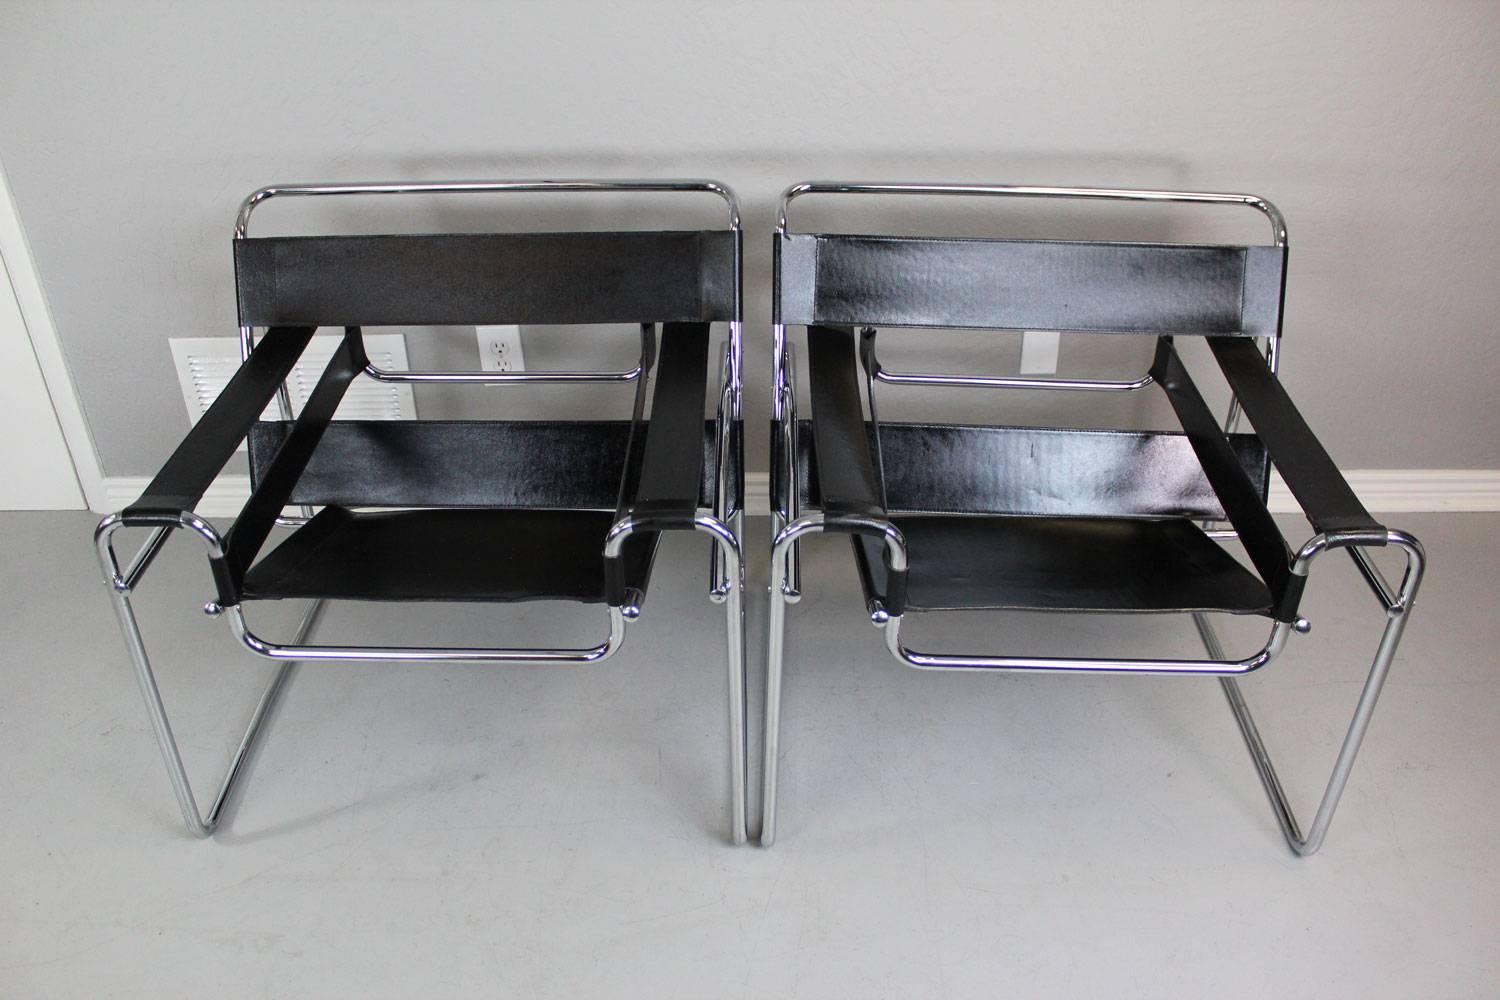 Vintage pair of B3 Wassily lounge chairs, designed by Marcel Breuer, with stitched black leather and a chromed steel tube frame, all in excellent condition.

Marcel Breuer was an apprentice at the Bauhaus in 1925 when he conceived the first